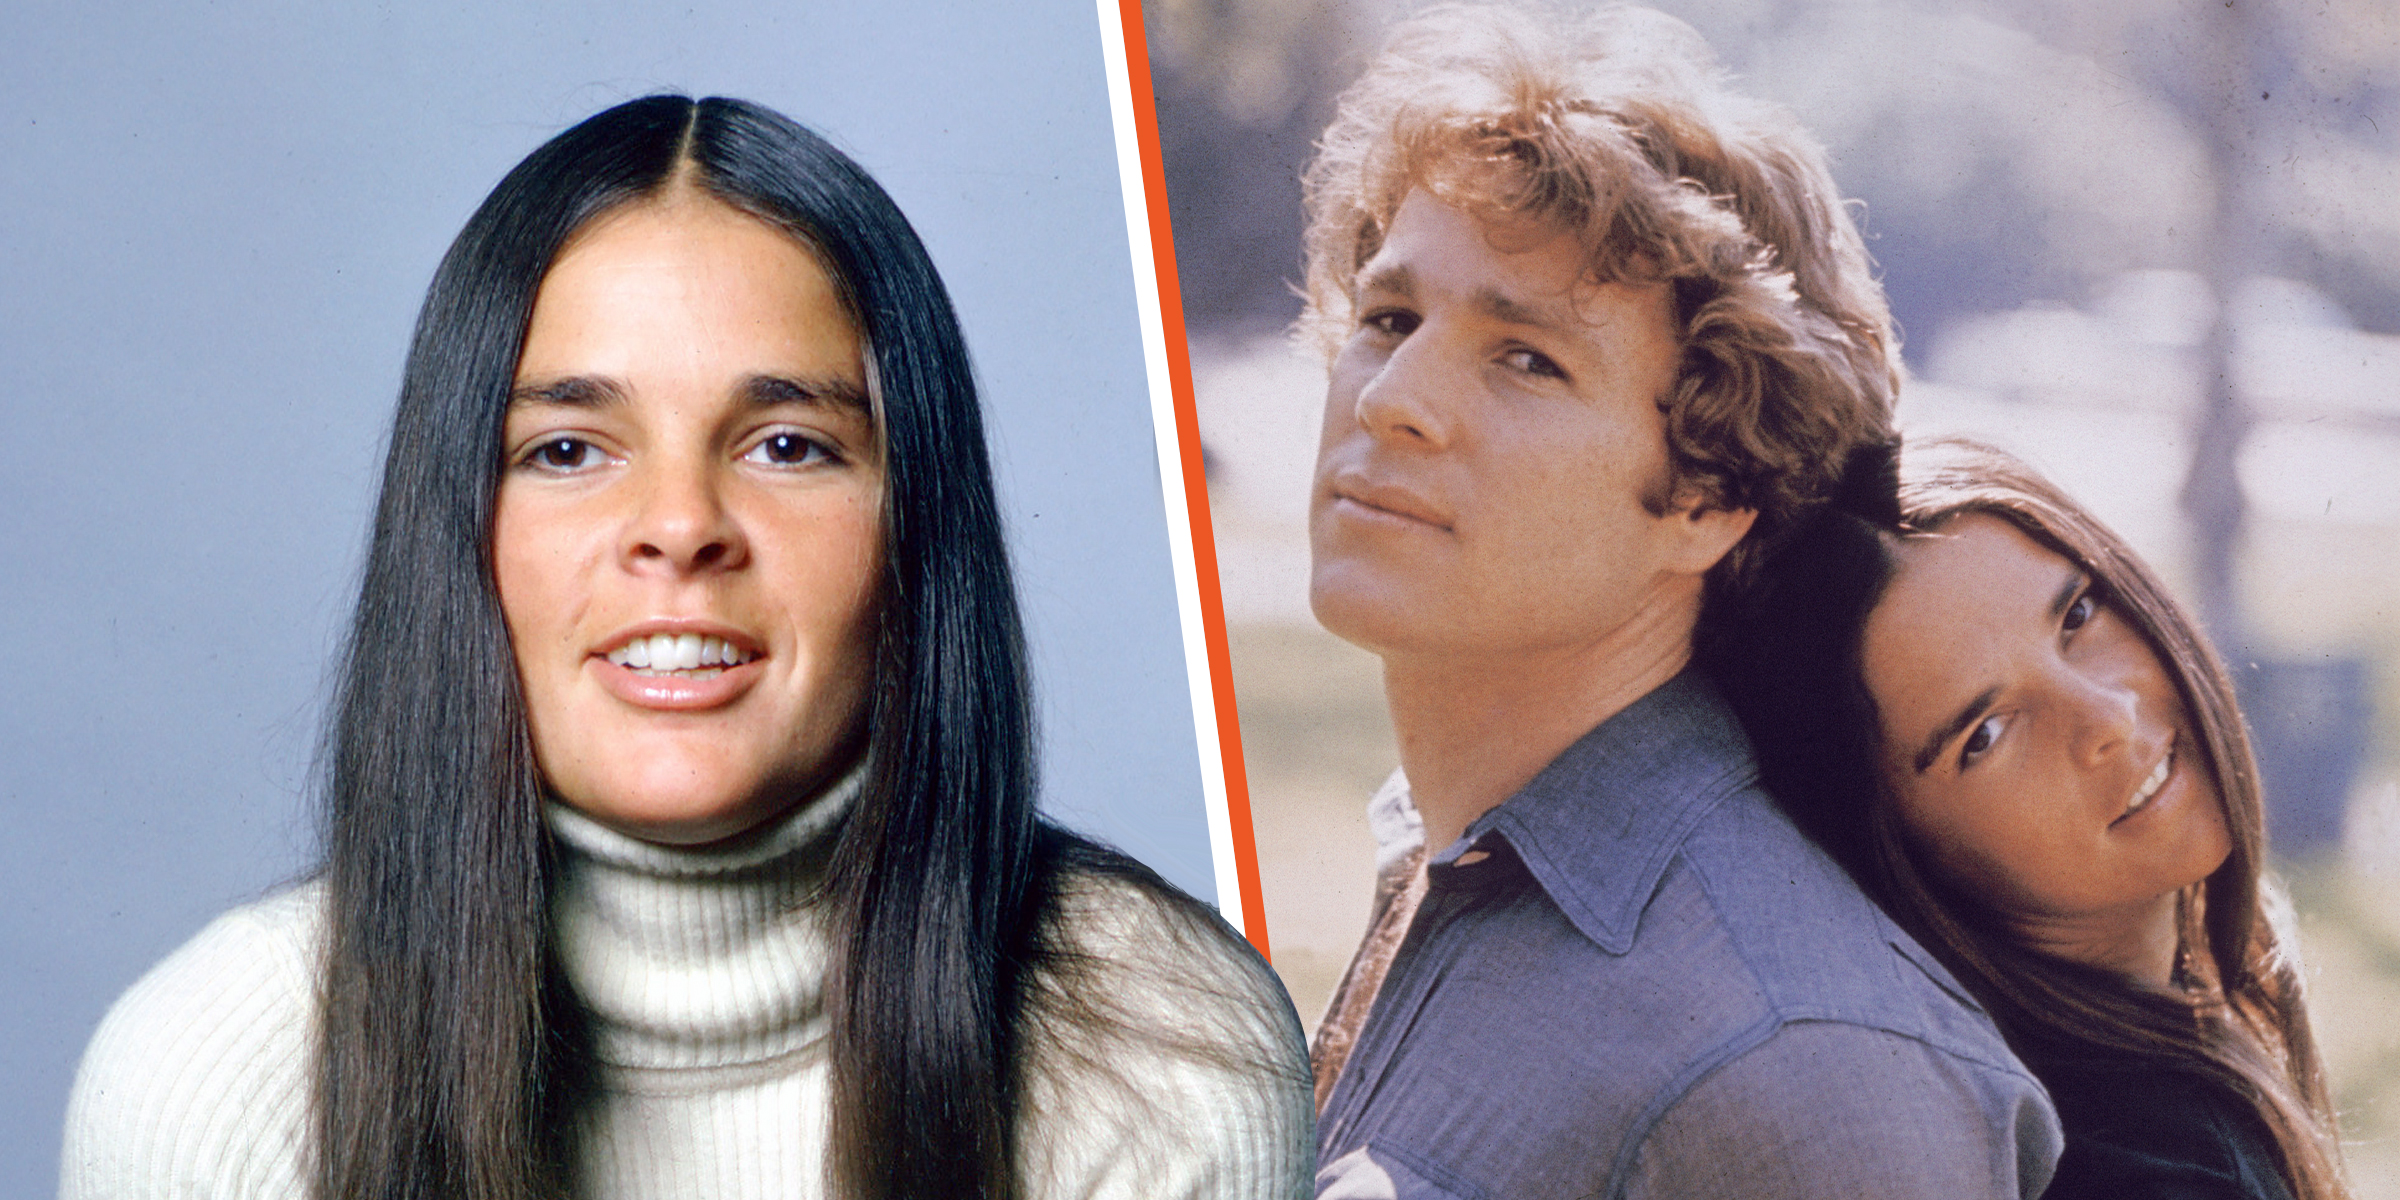 Ali MacGraw, 1970 | Ryan O'Neal and Ali MacGraw, 1970 | Source: Getty Images